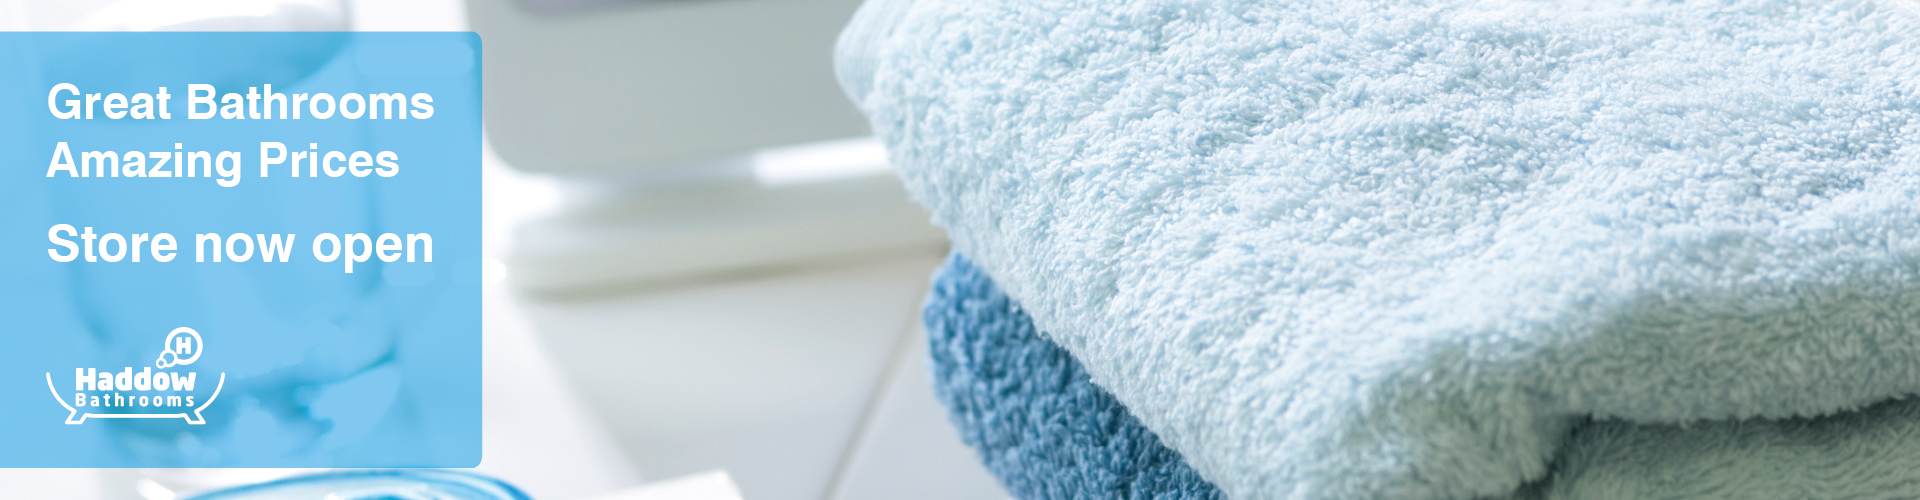 Haddow Bathrooms page banner with image of fluffy towels and a blue background panel with white text that reads 'Great Bathrooms Amazing Prices New store now open'